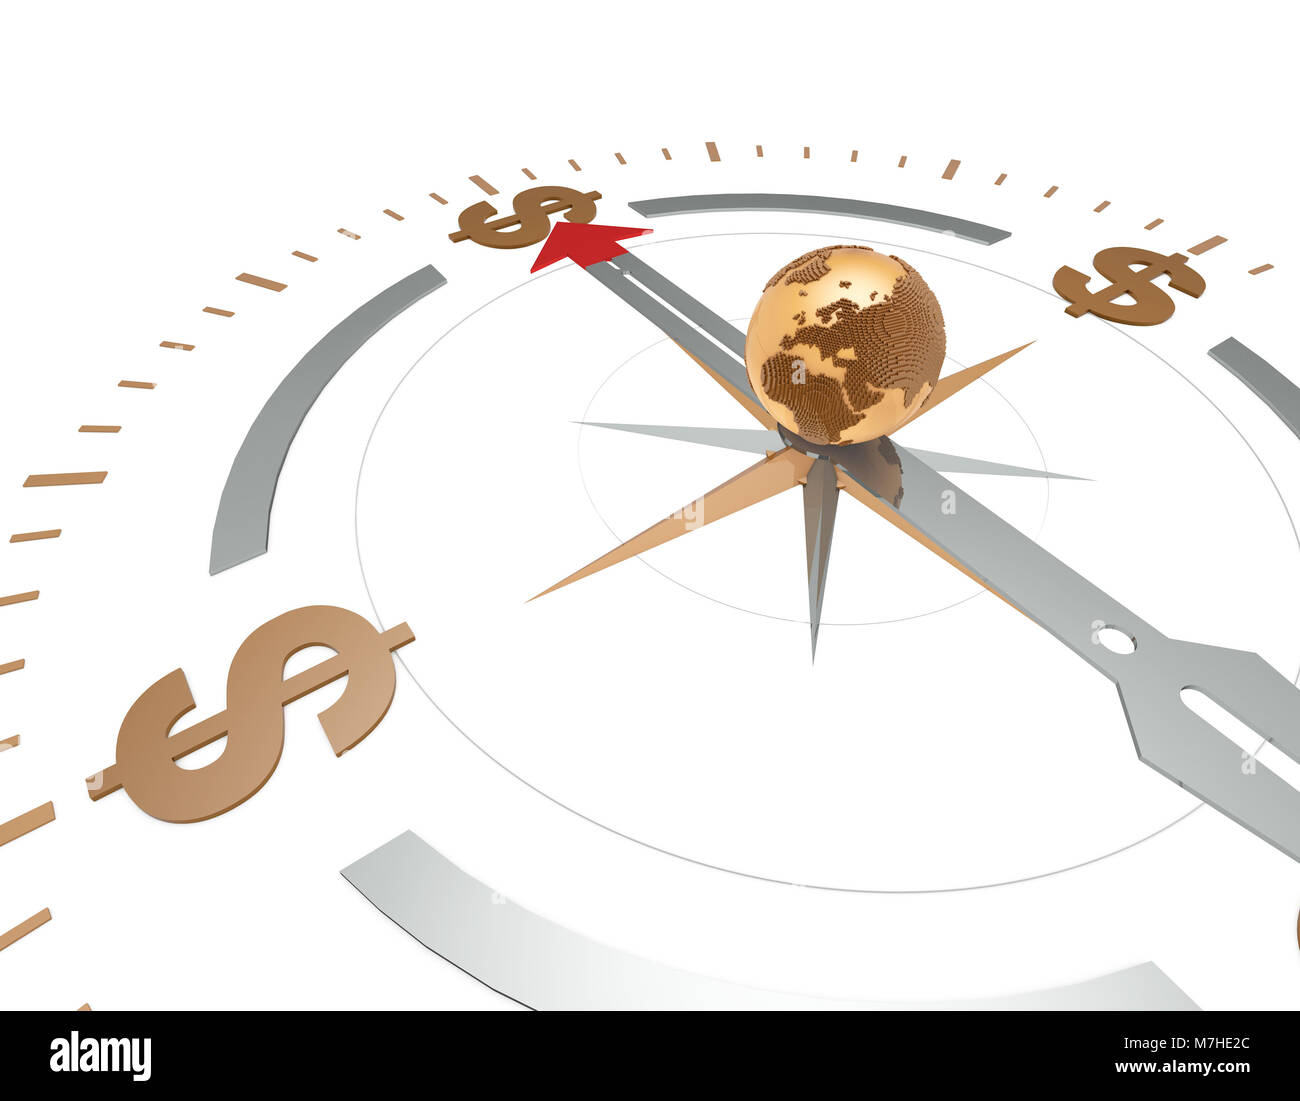 Global Financial Development Direction, Strategic Planning, Earth and Compass, Currency Symbols Stock Photo